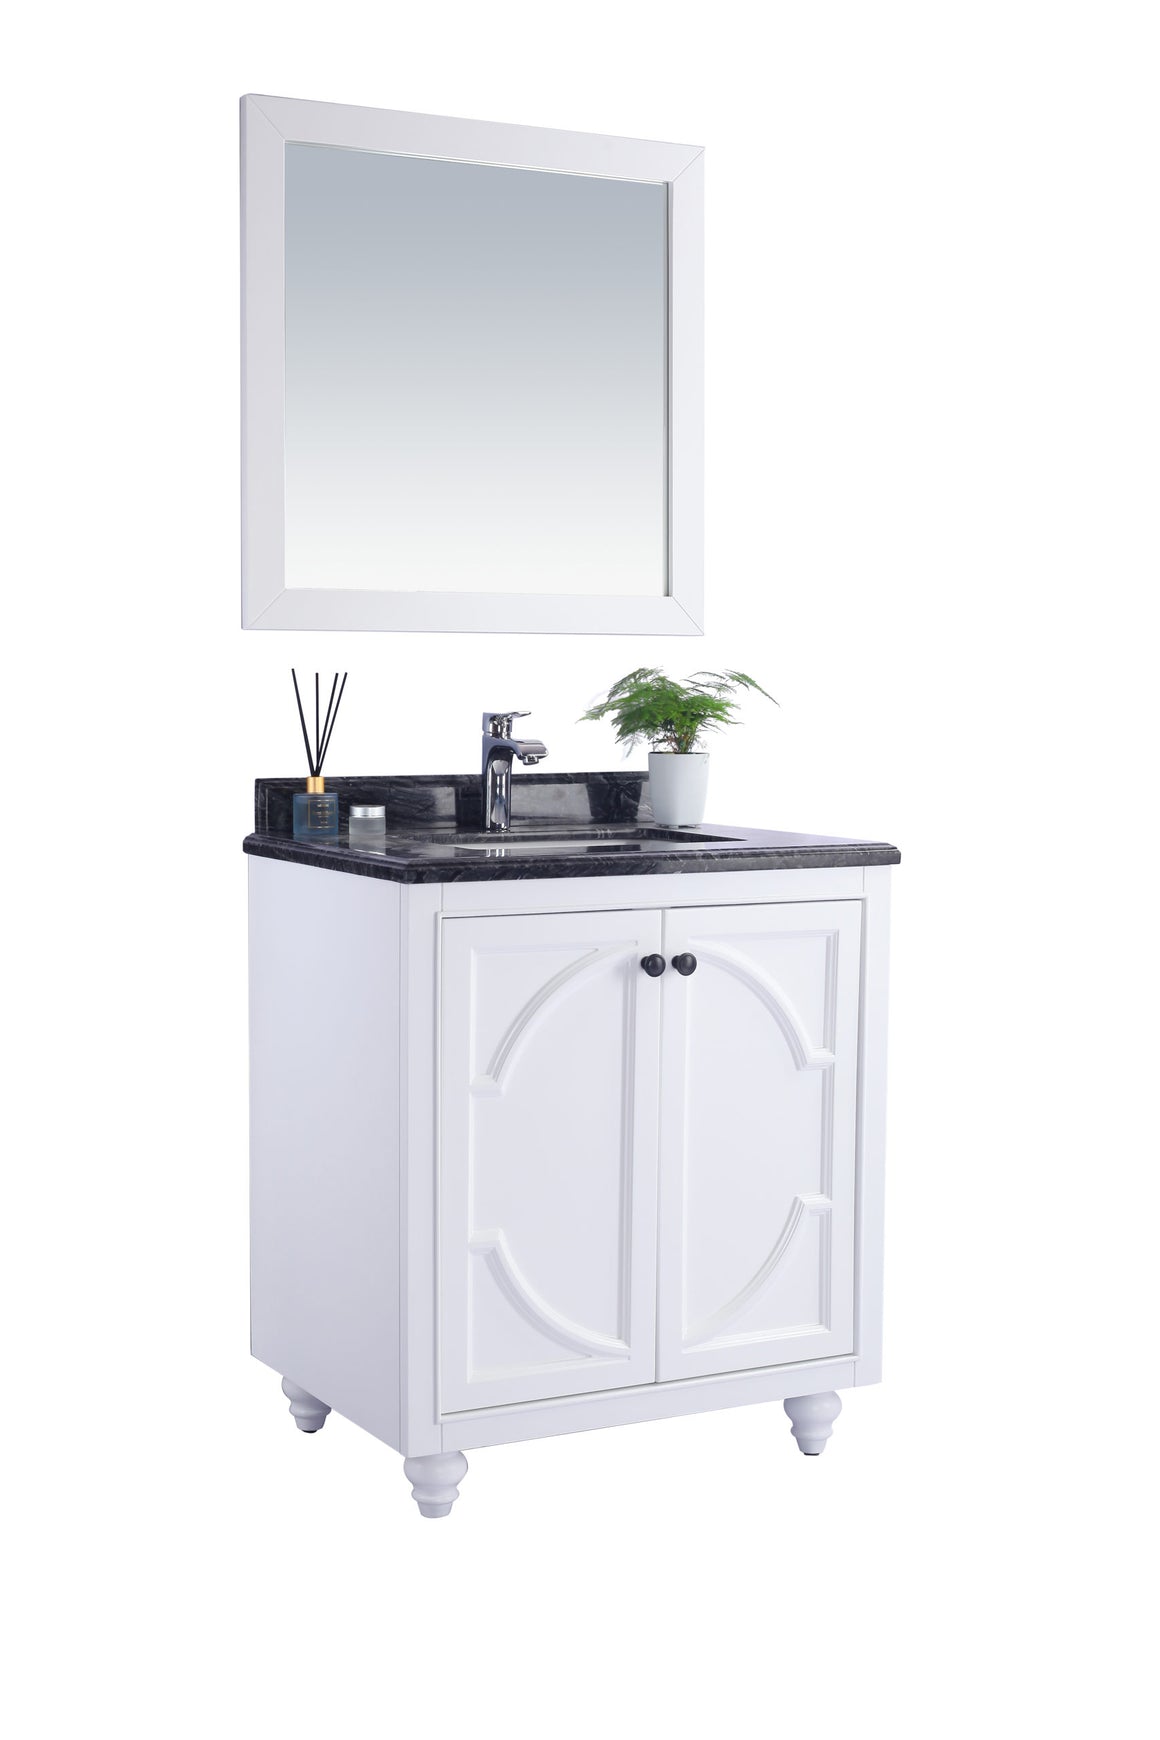 Odyssey - 30 - White Cabinet + Black Wood Marble Countertop